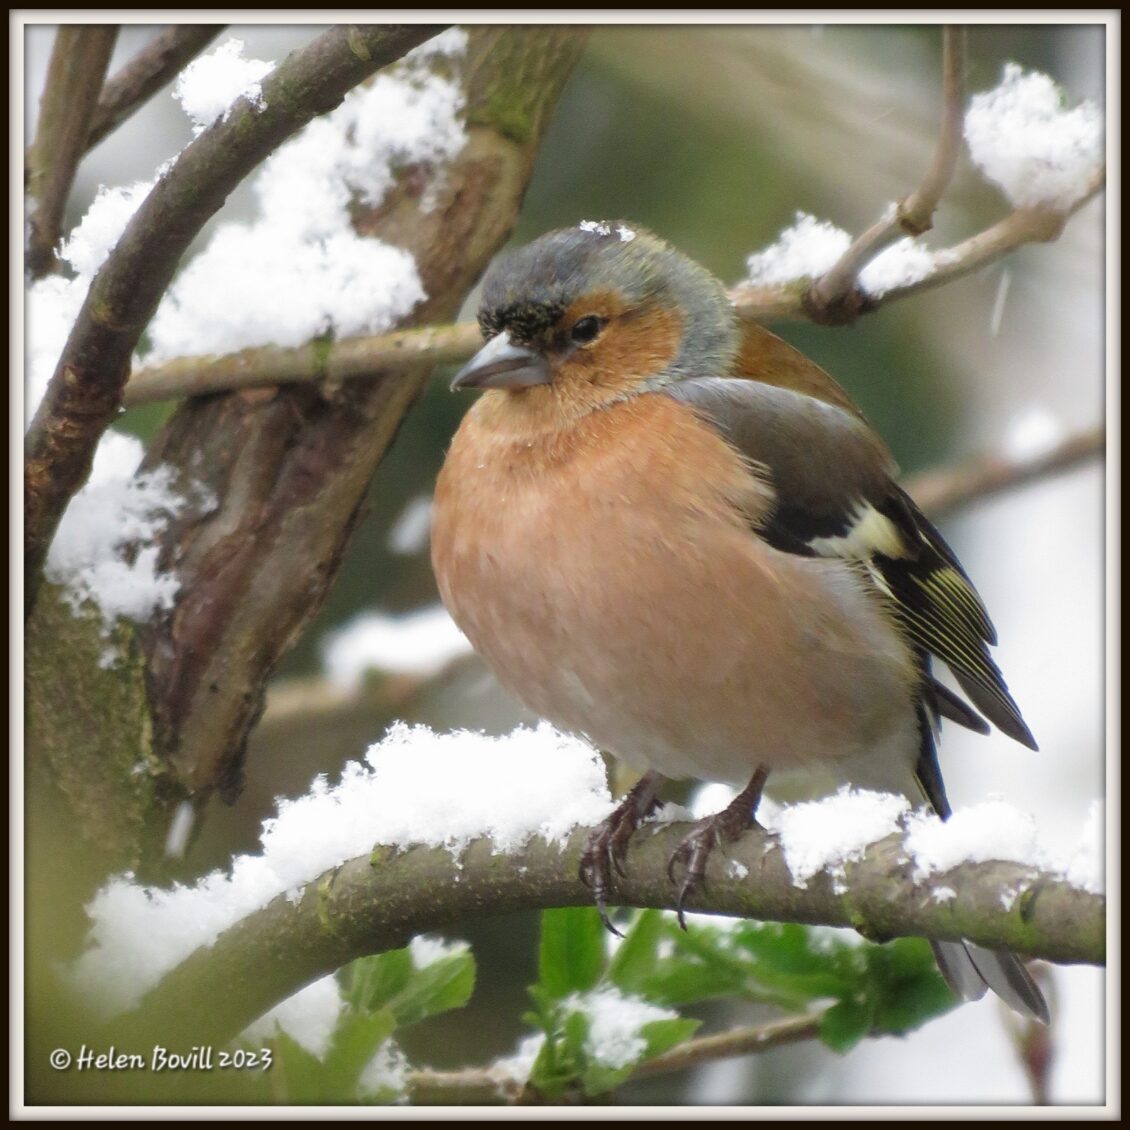 A Male Chaffinch sitting on a snowy branch in the cemetery